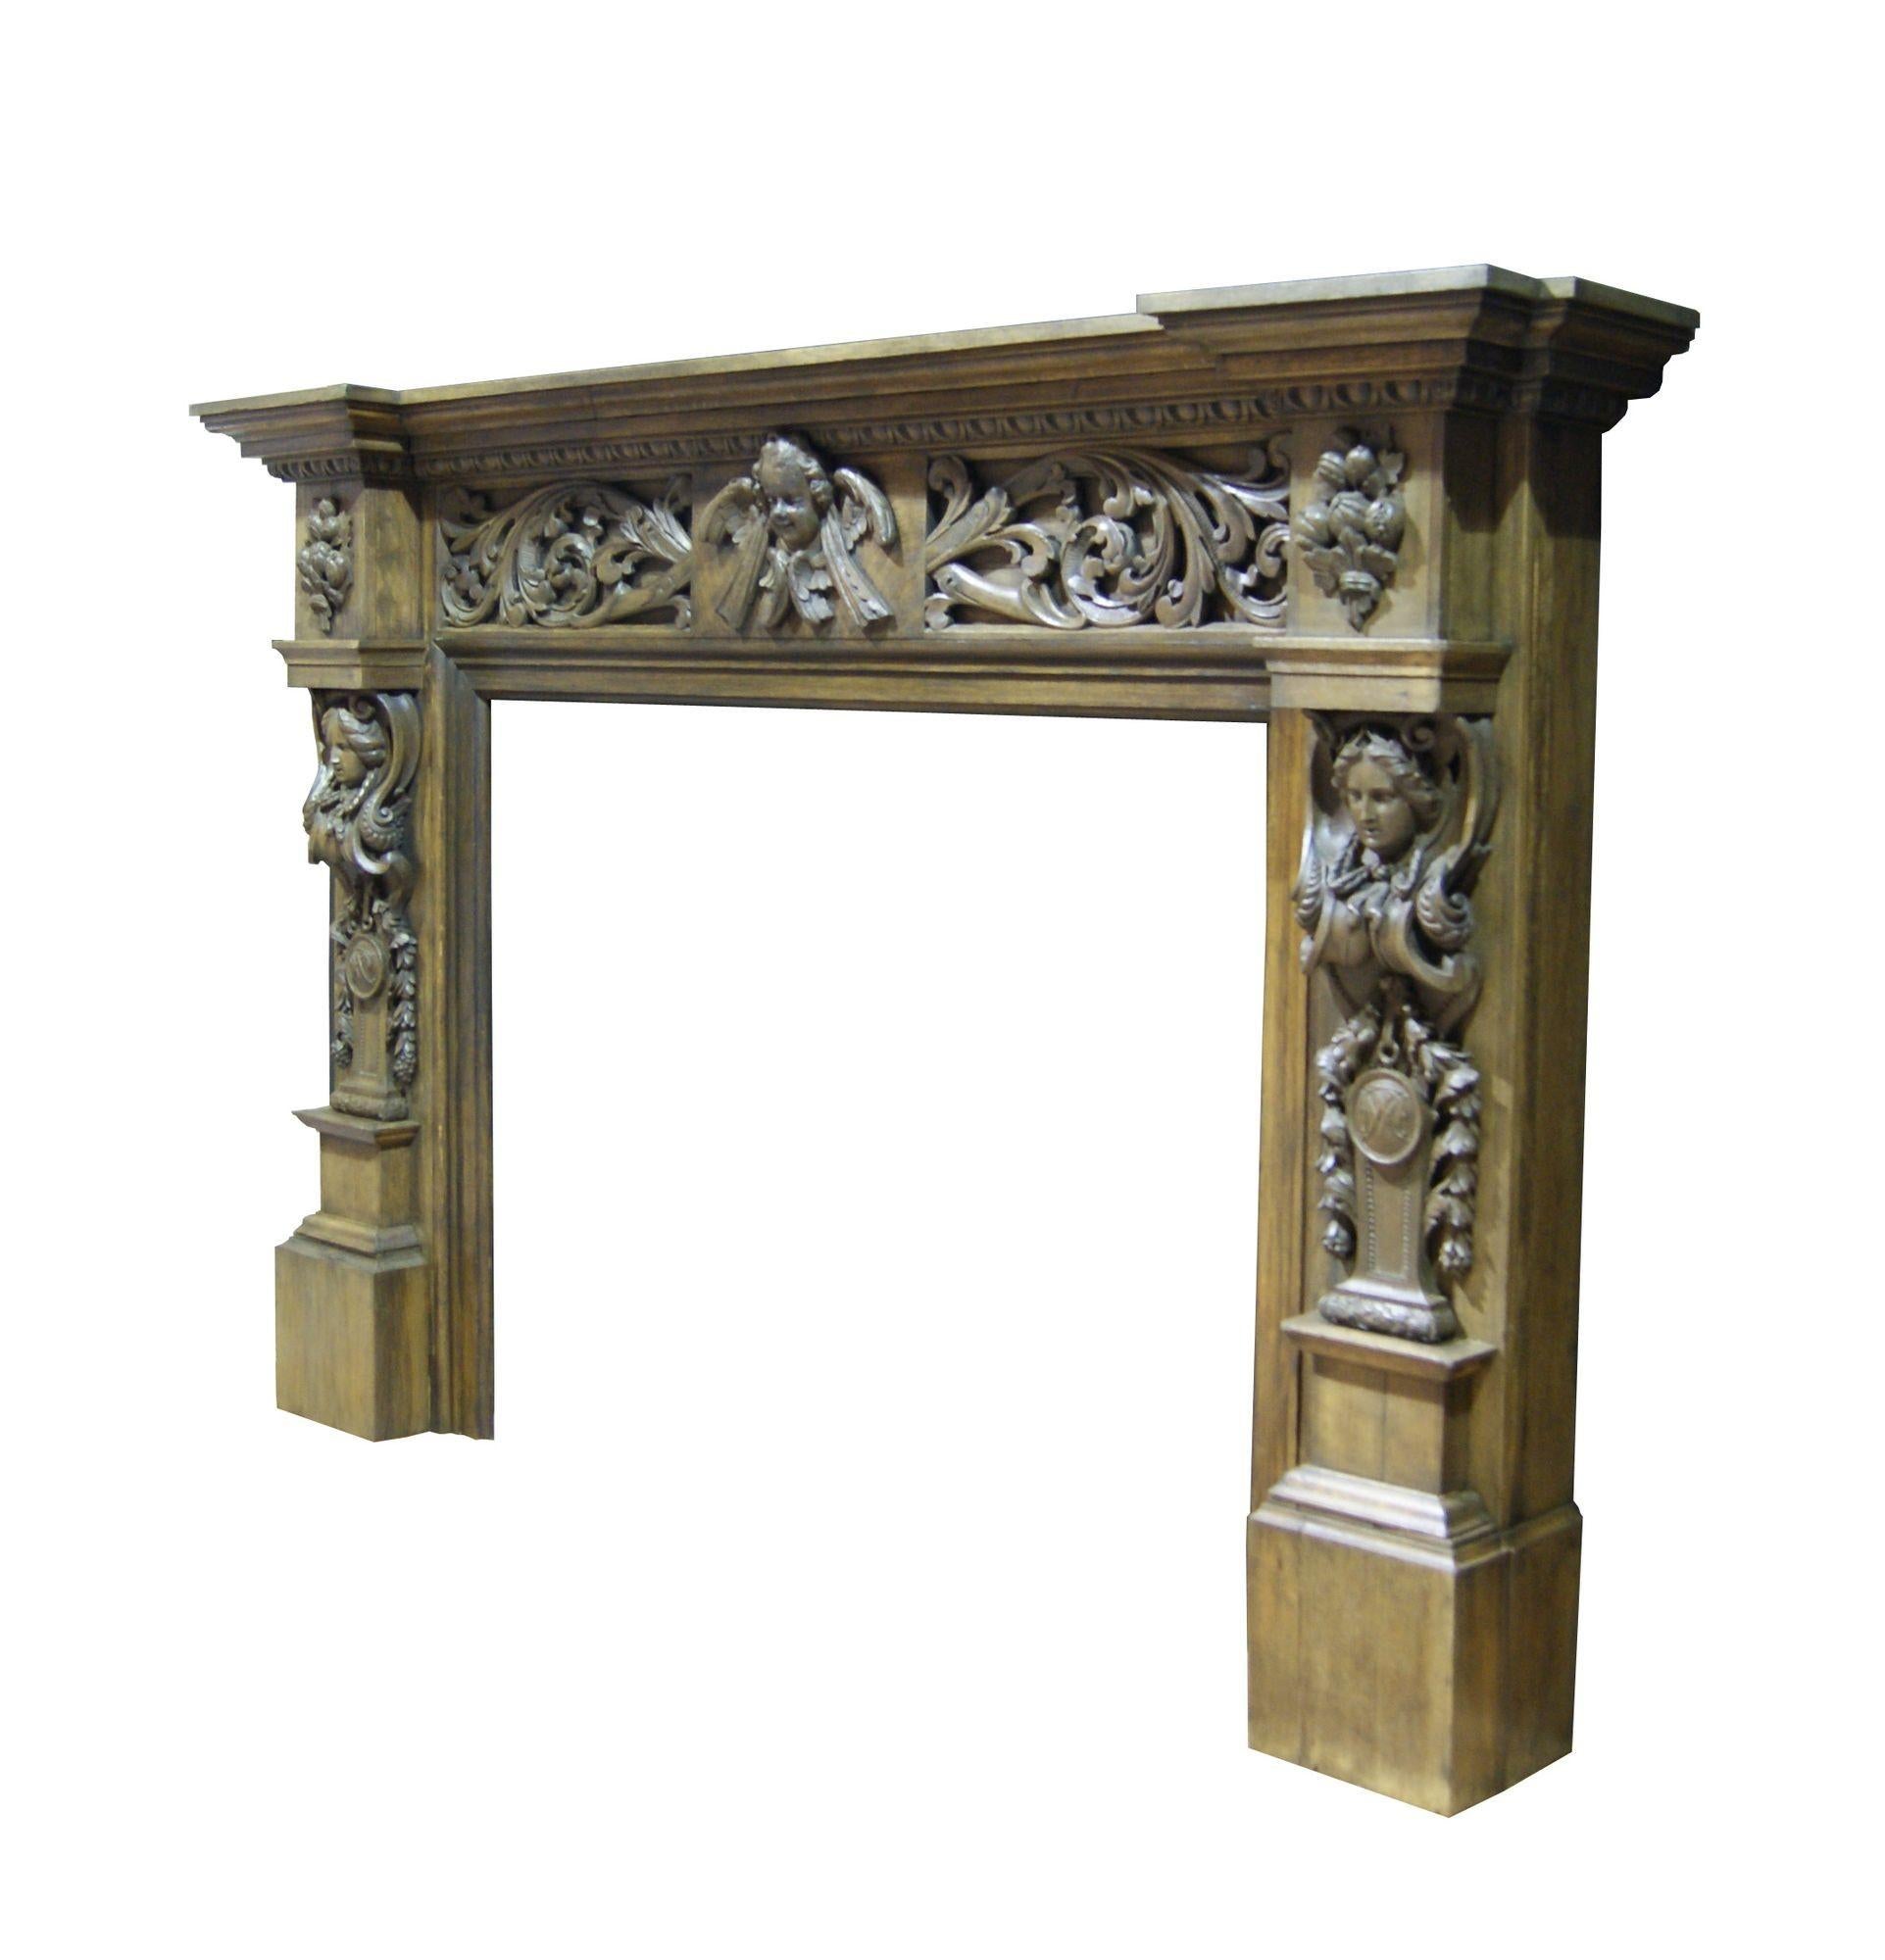 Hand-Crafted A Large and Imposing English Antique Oak Fireplace Mantel